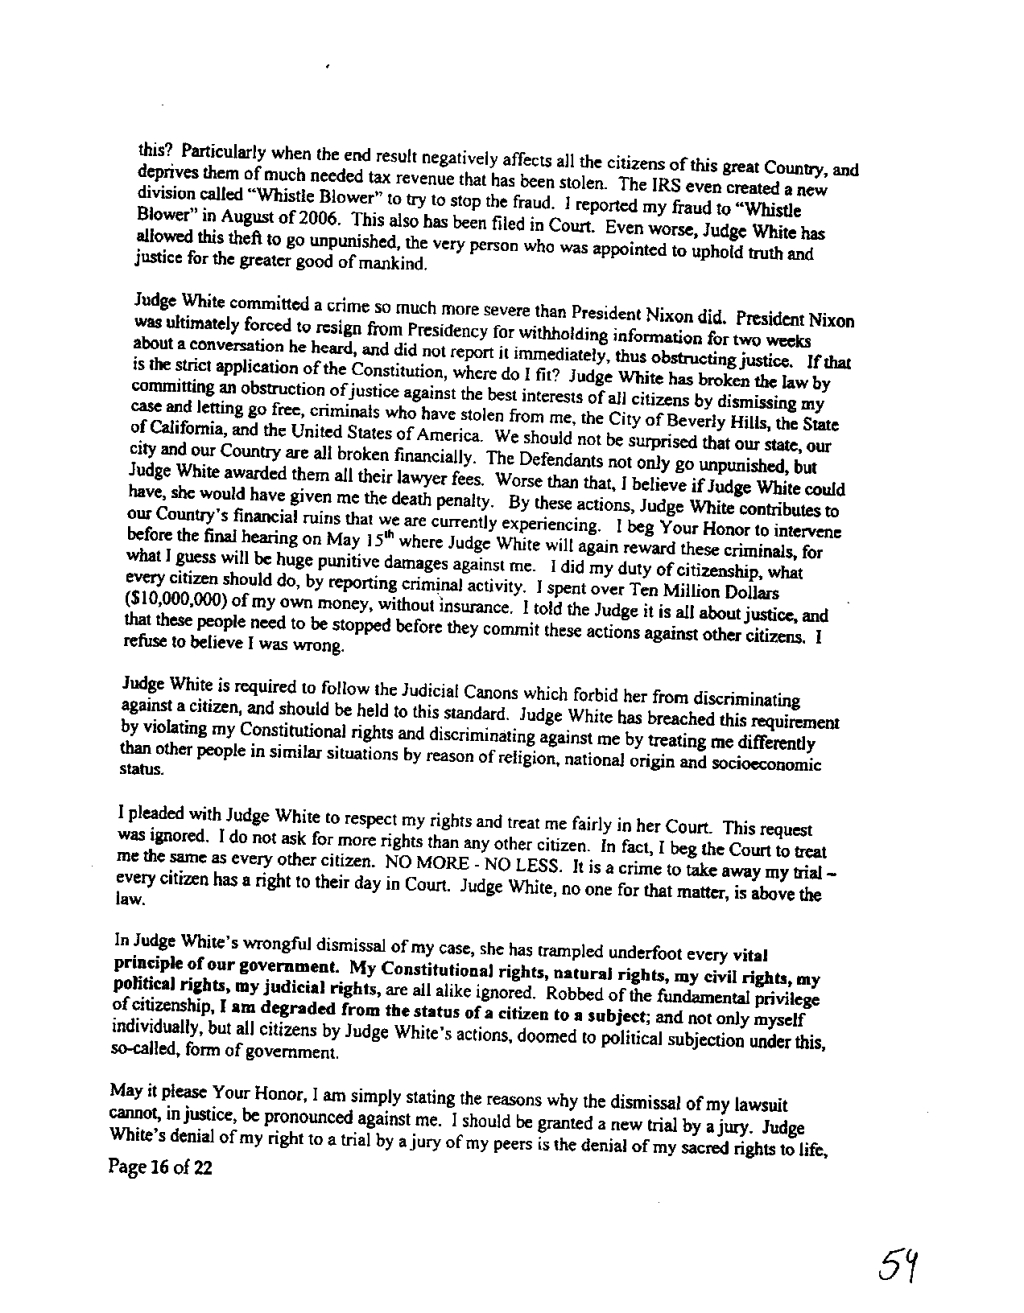 full complaint judge white for federal with exhibits_1_page45